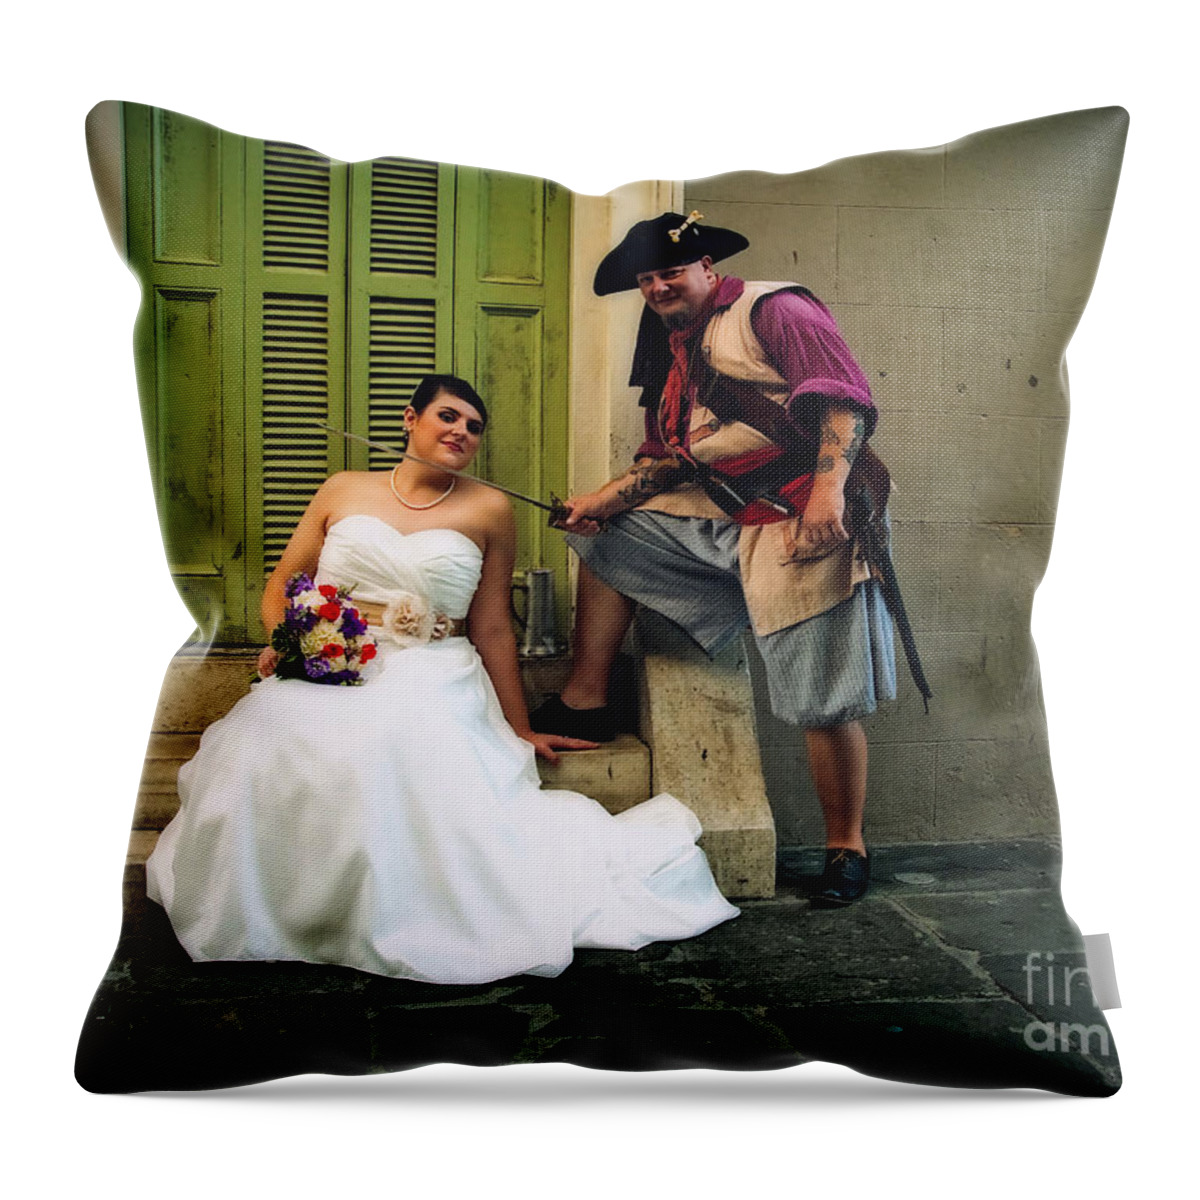 New Orleans Throw Pillow featuring the photograph The Pirate Takes A Bride by Kathleen K Parker